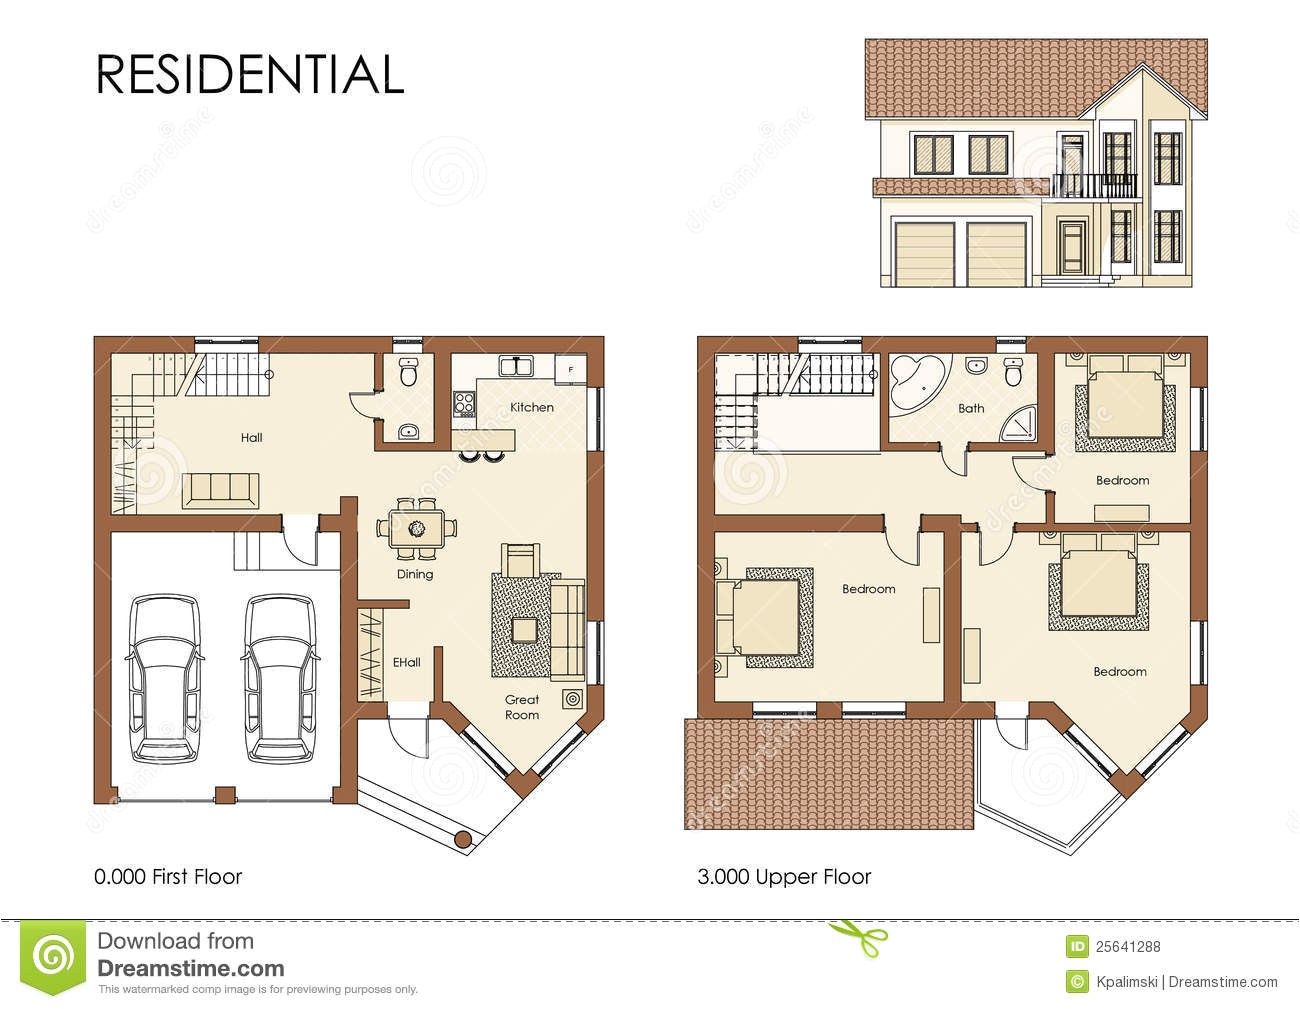 royalty free stock photos residential house plan image25641288